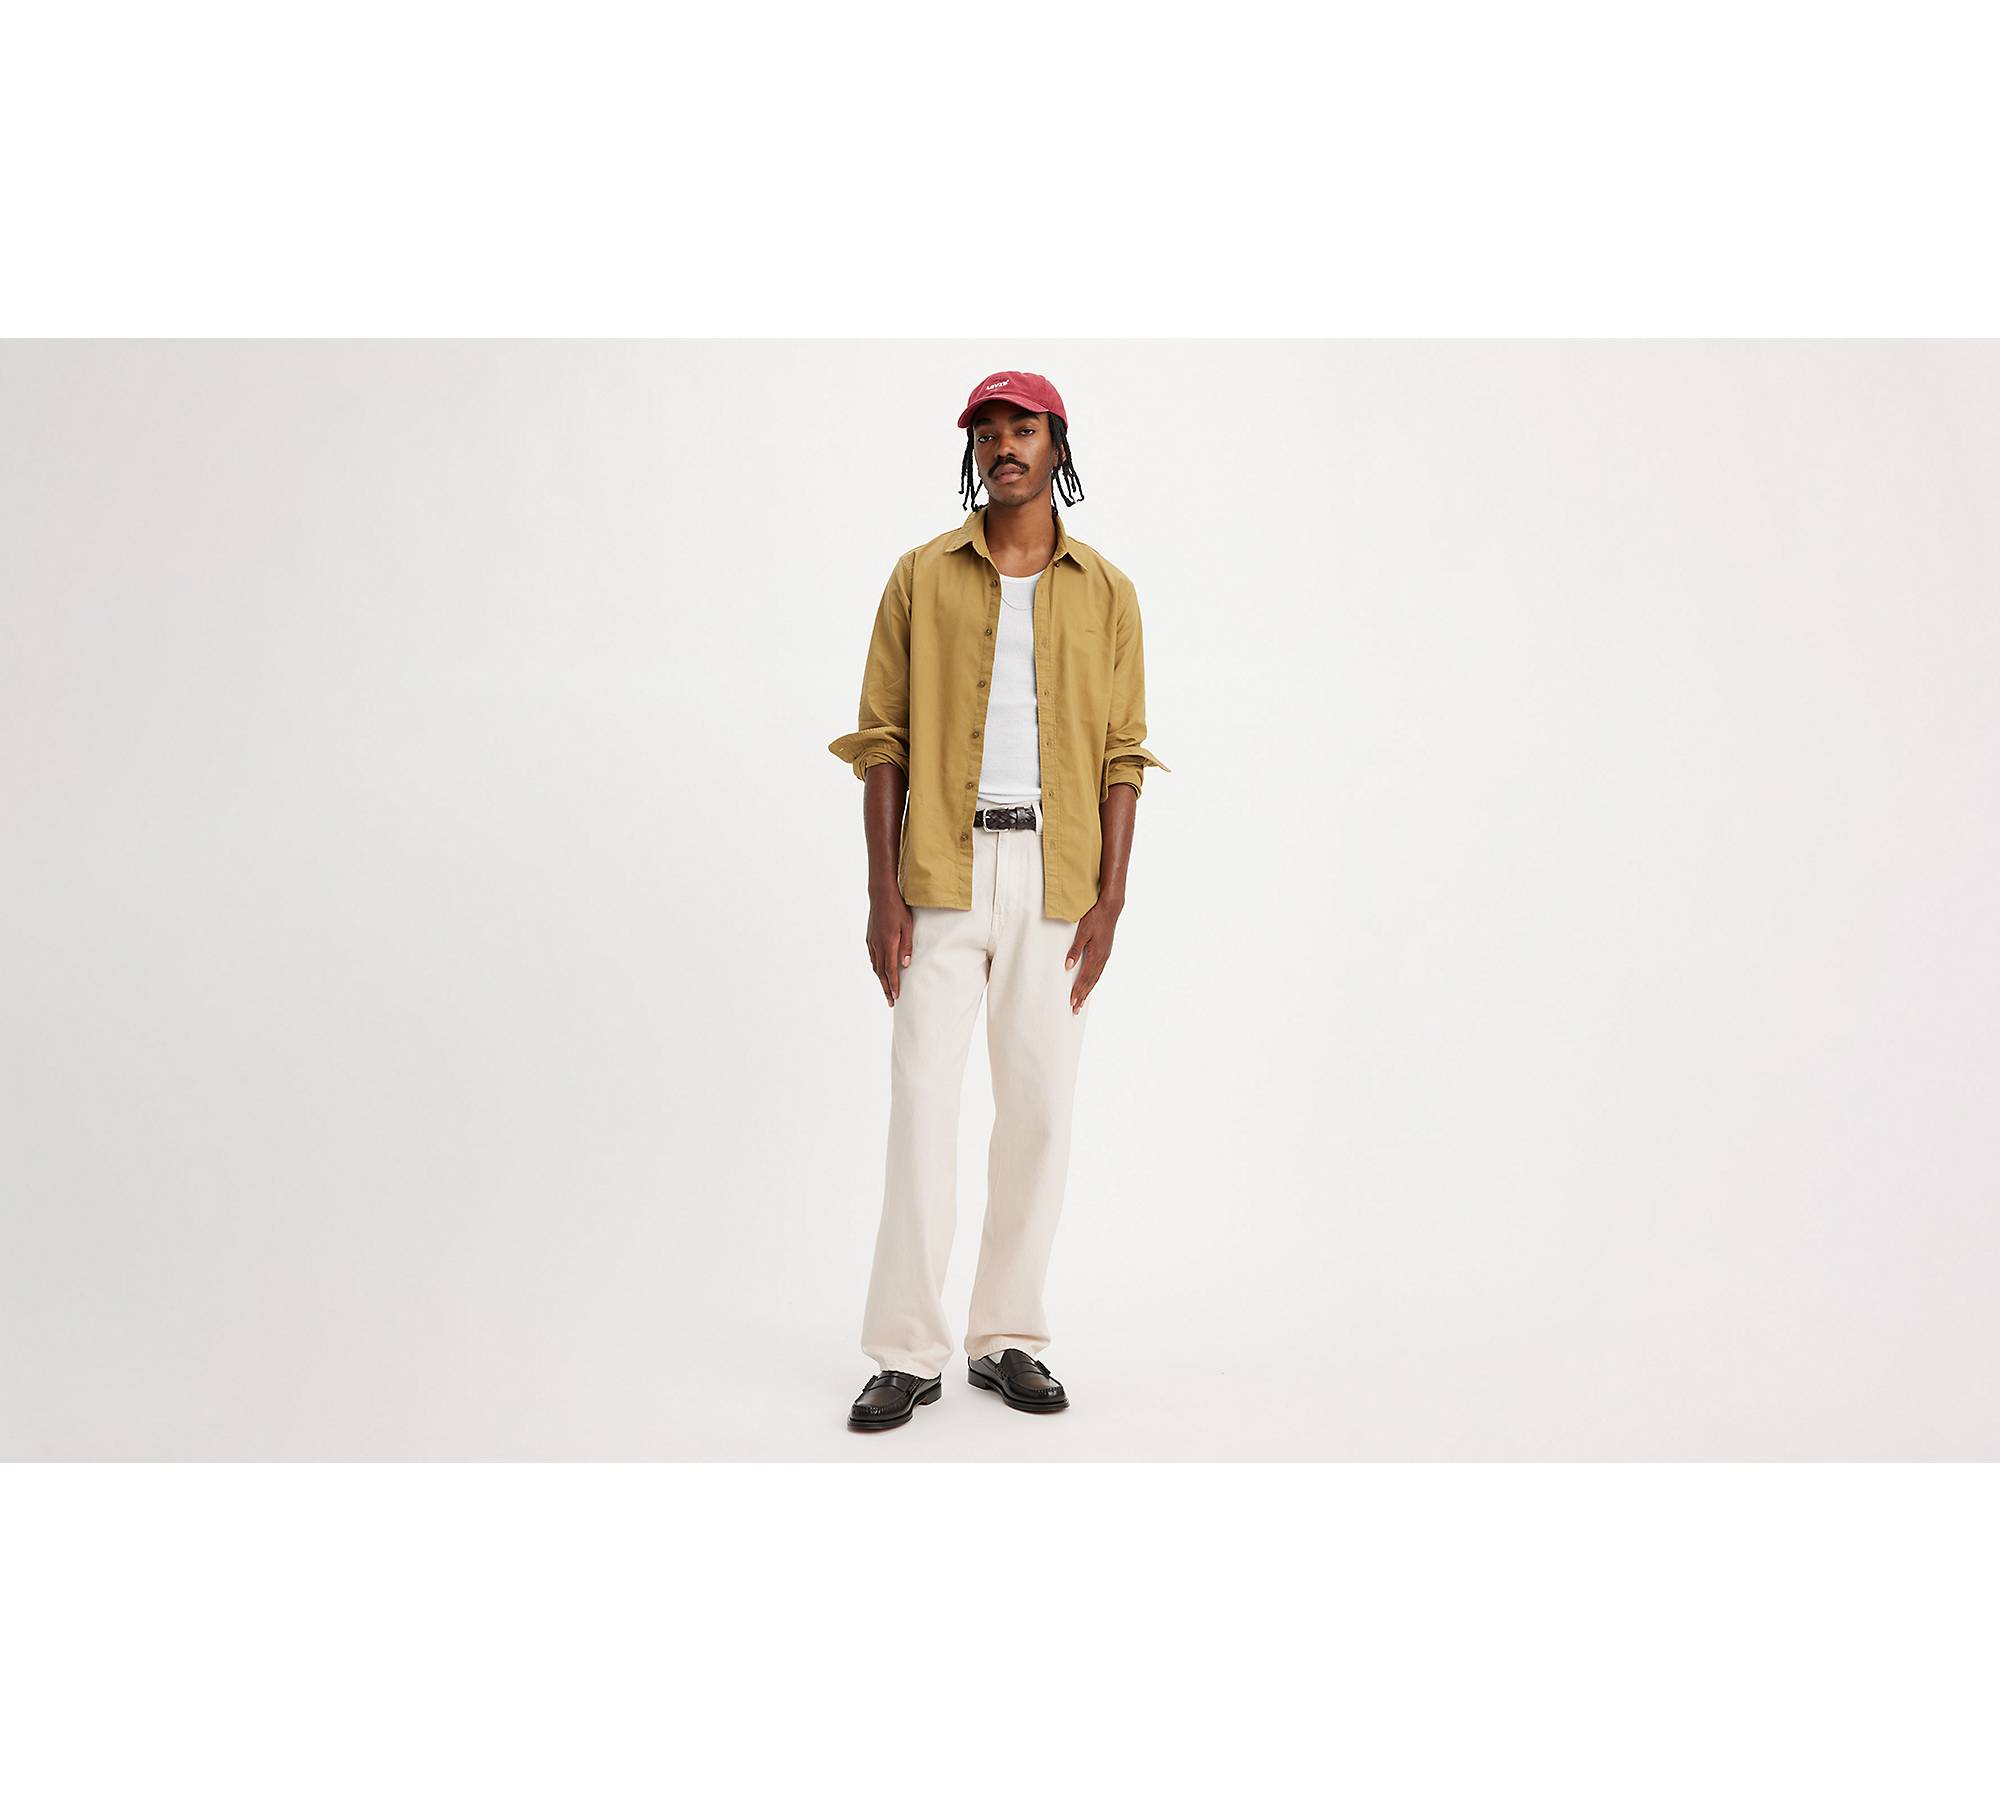 568™ Stay Loose Men's Jeans - White | Levi's® US